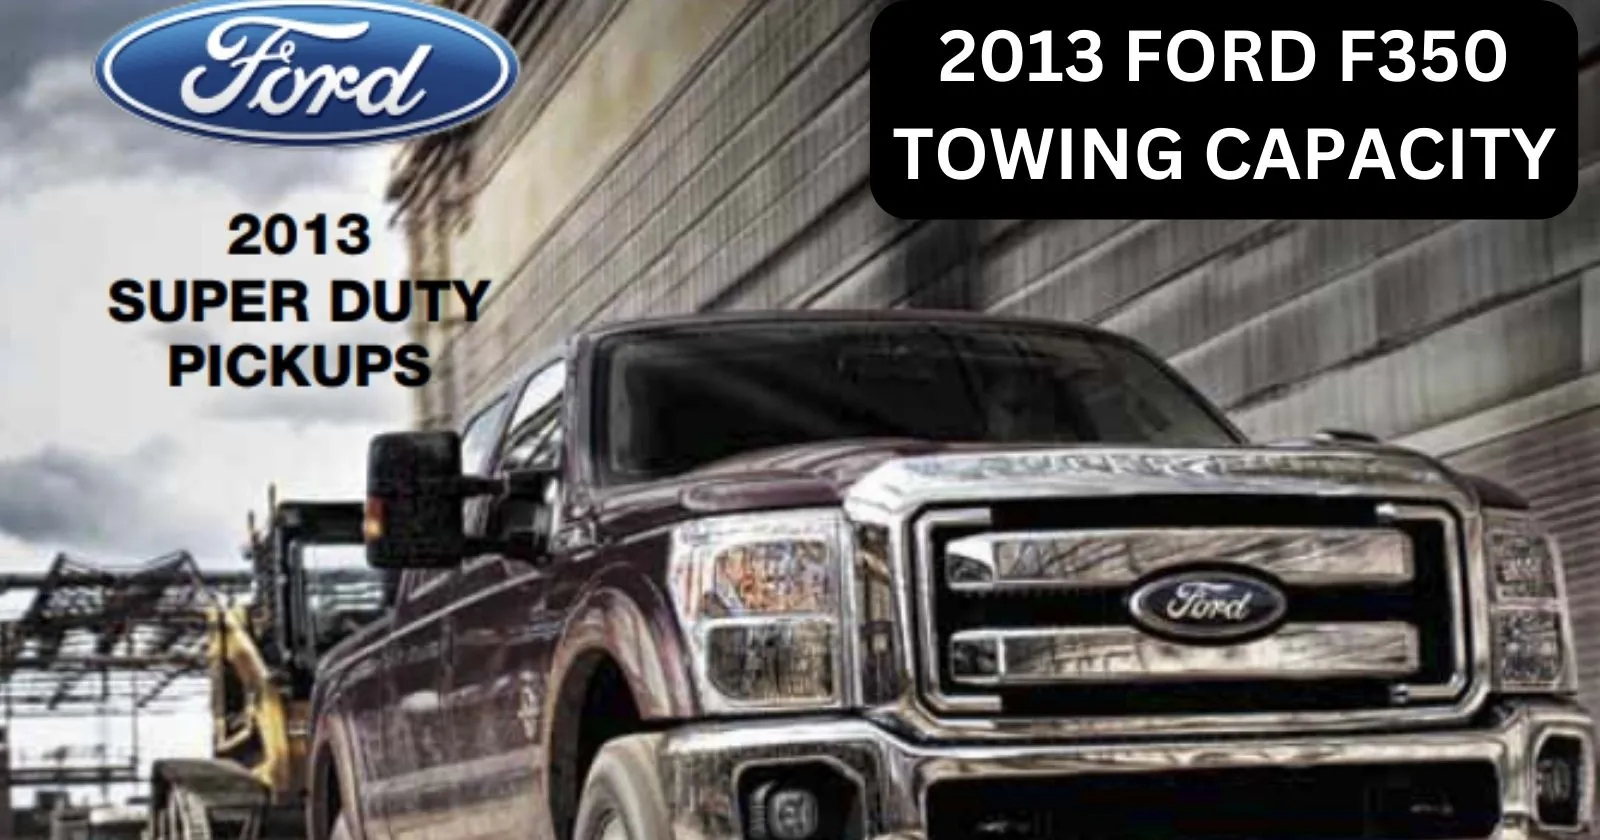 explore-2013-ford-f350-towing-capacity-with-chart-thecartowing